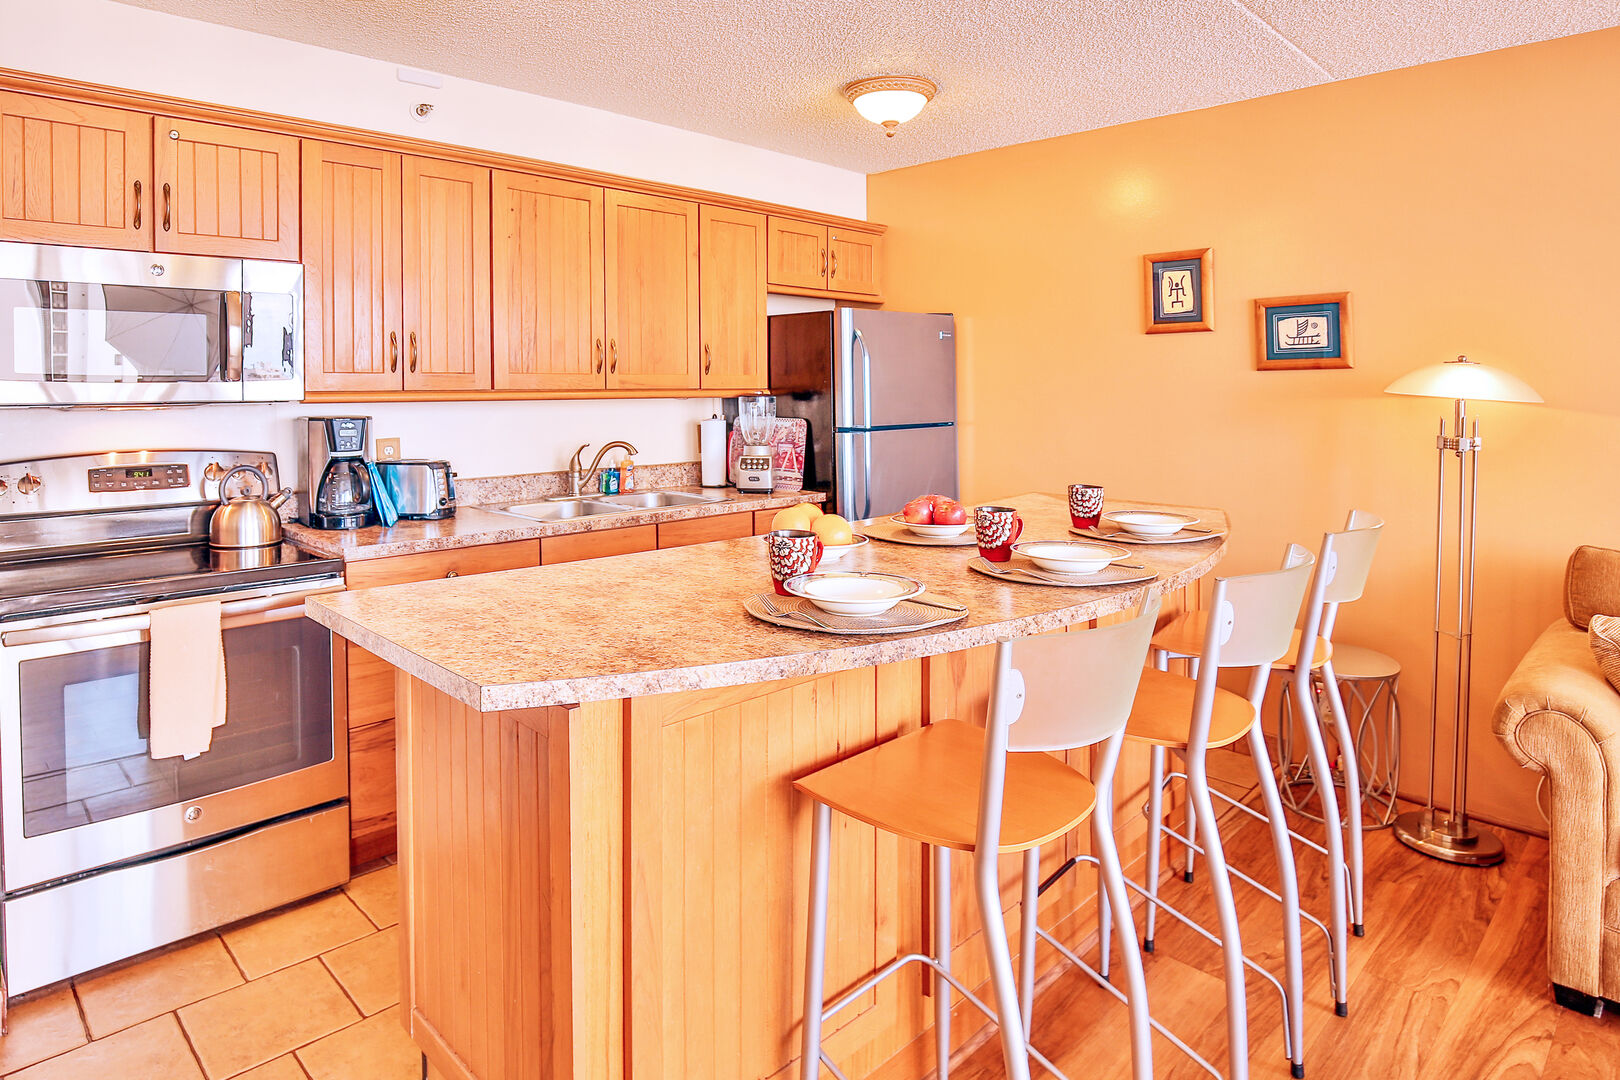 Fully equipped kitchen with granite counter-top and 3 bar stools